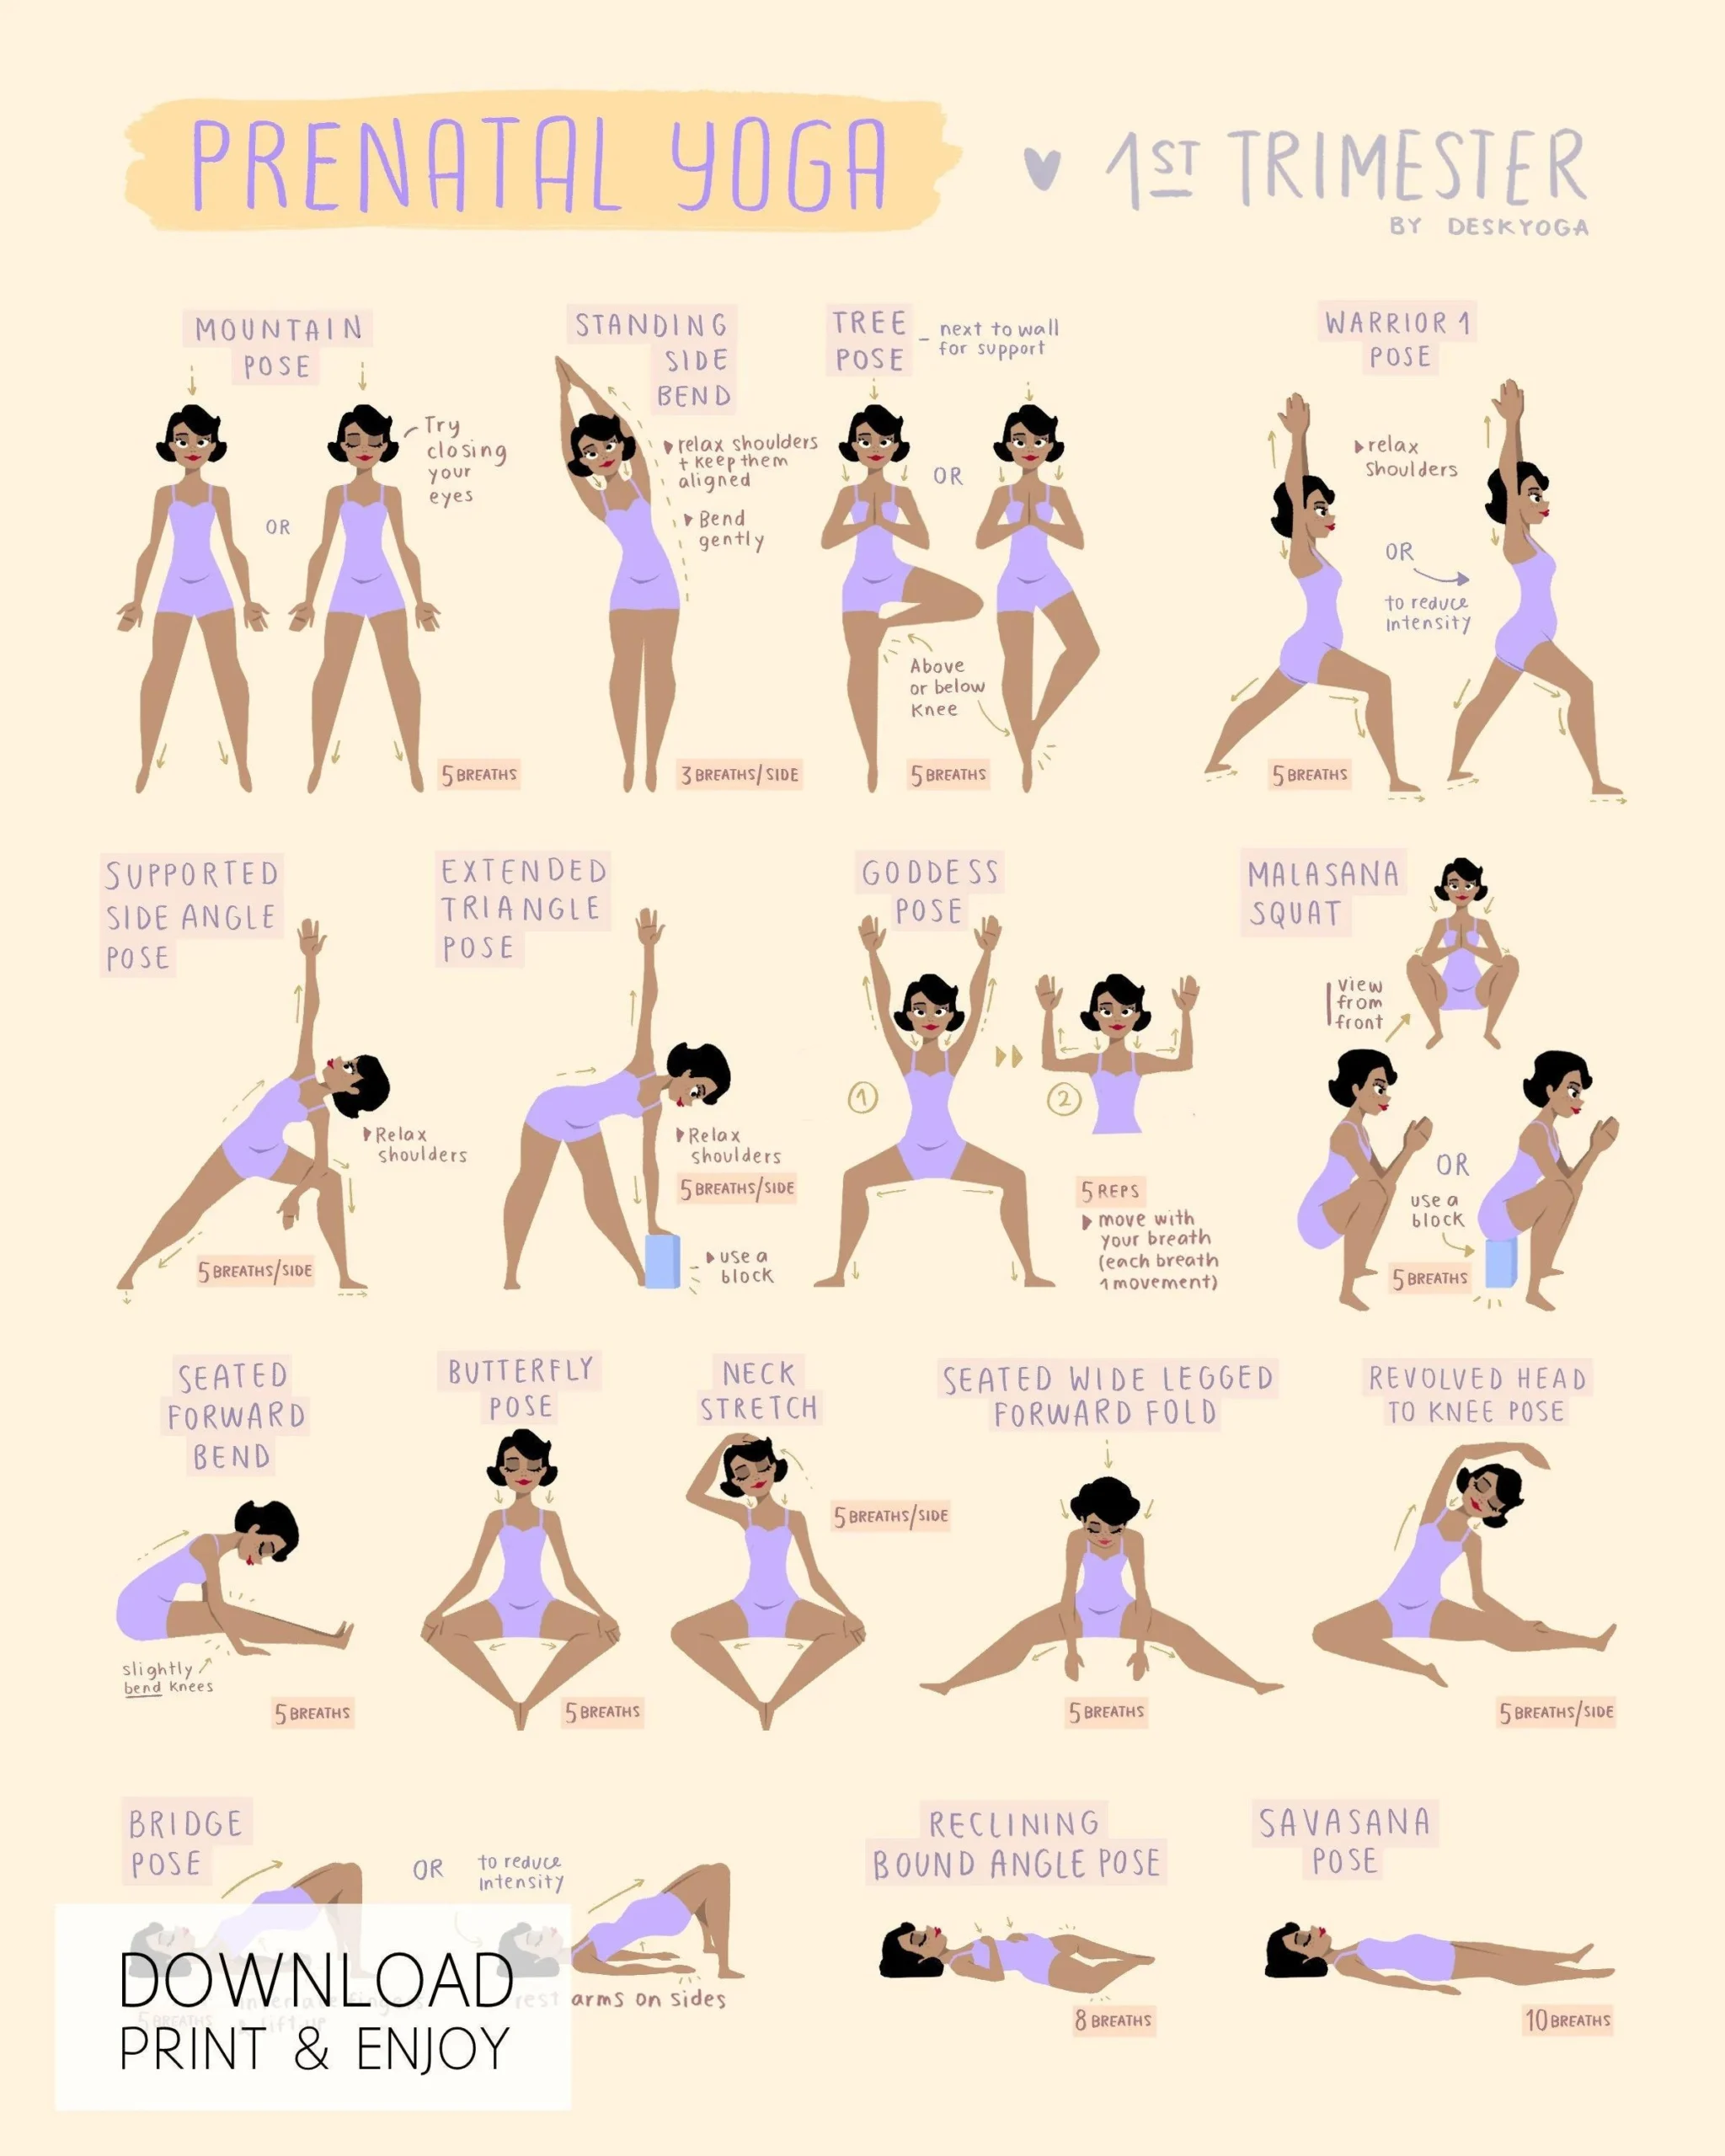 yoga and pregnancy first trimester - Is it safe to do yoga in the first trimester